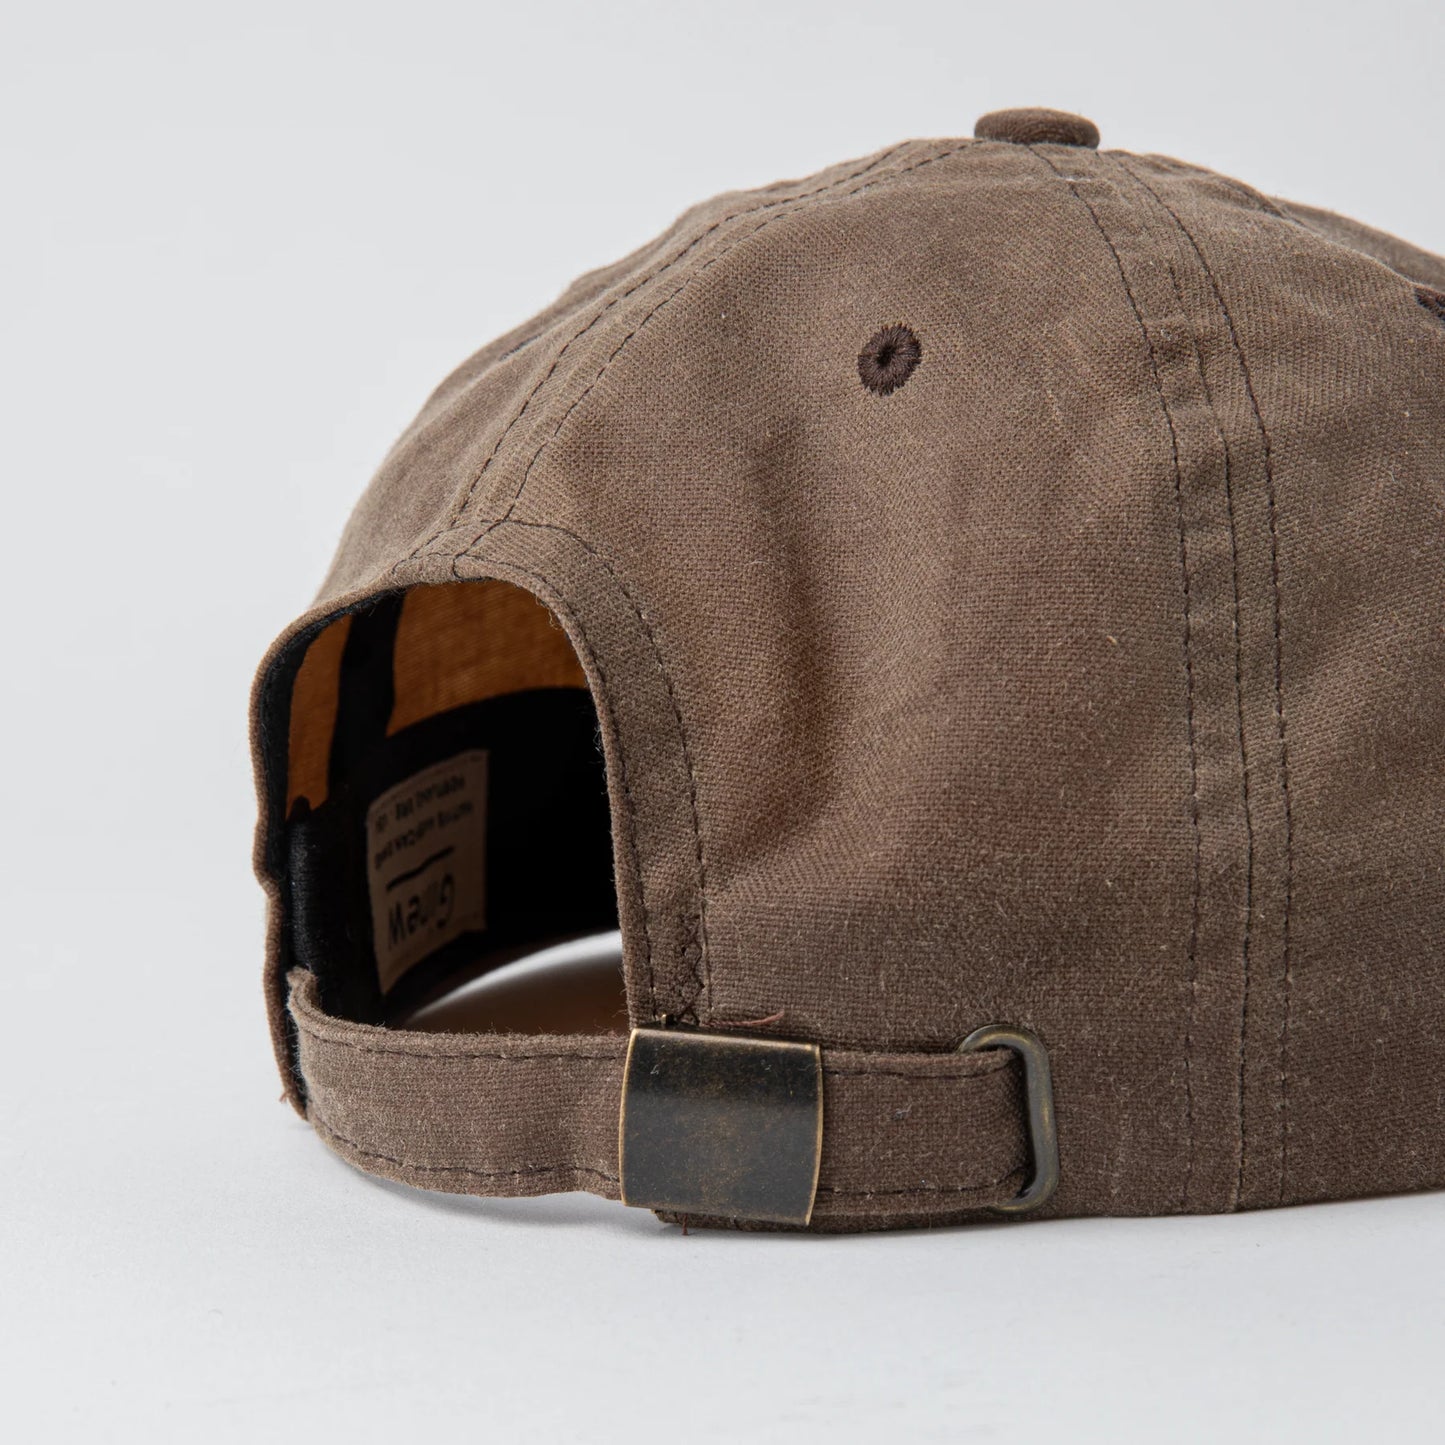 Ginew Crow Wing Wax Canvas Ball Cap